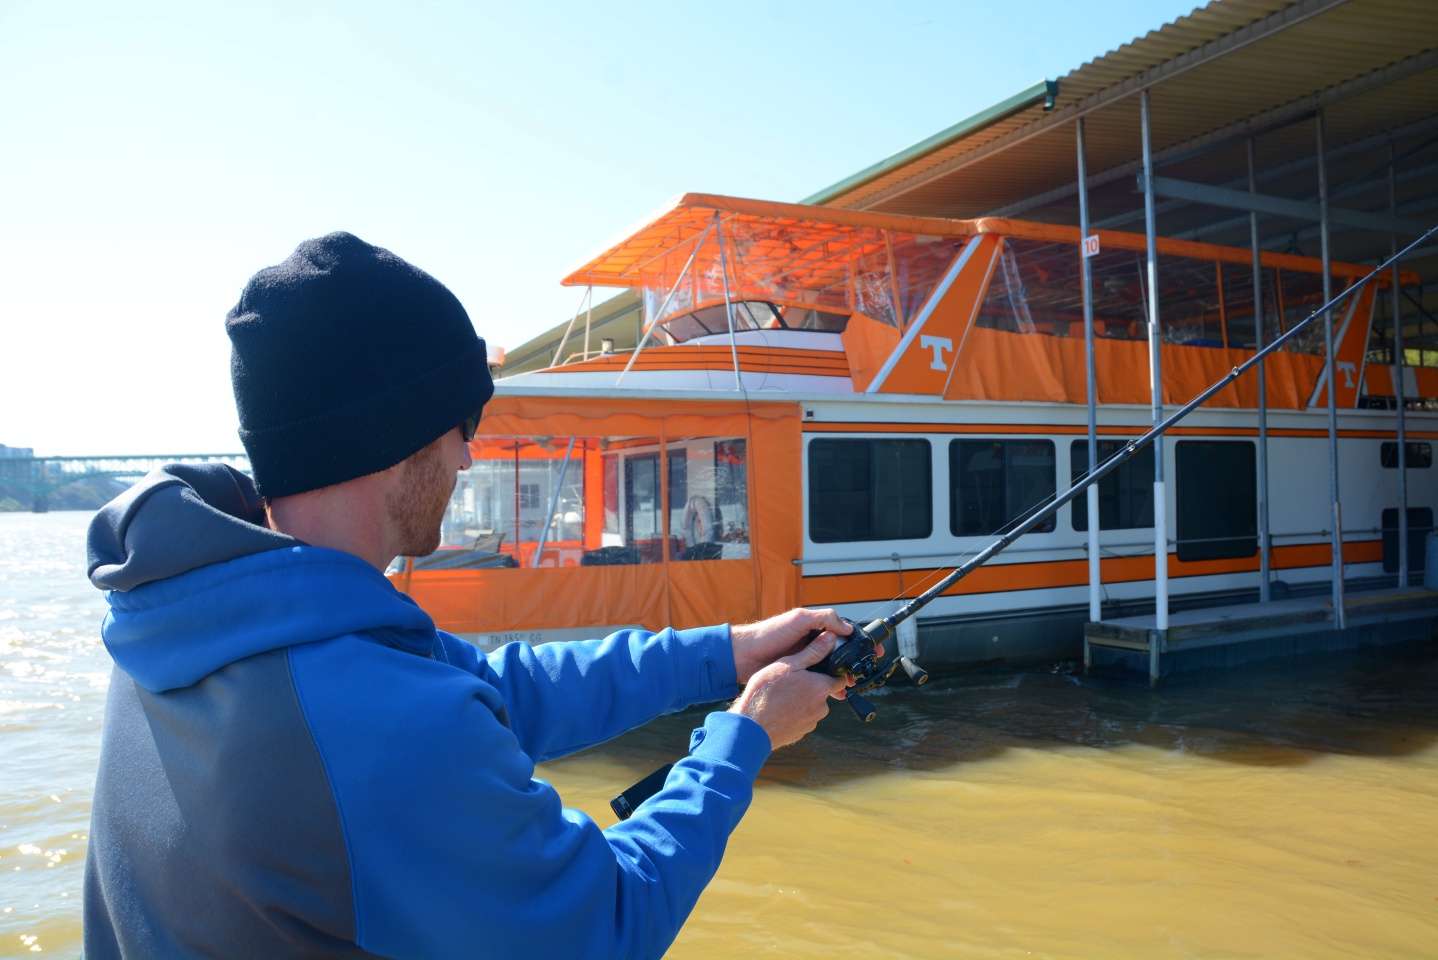 This houseboat likely belongs in the Vol Navy, which dates back to the 1960s. 
